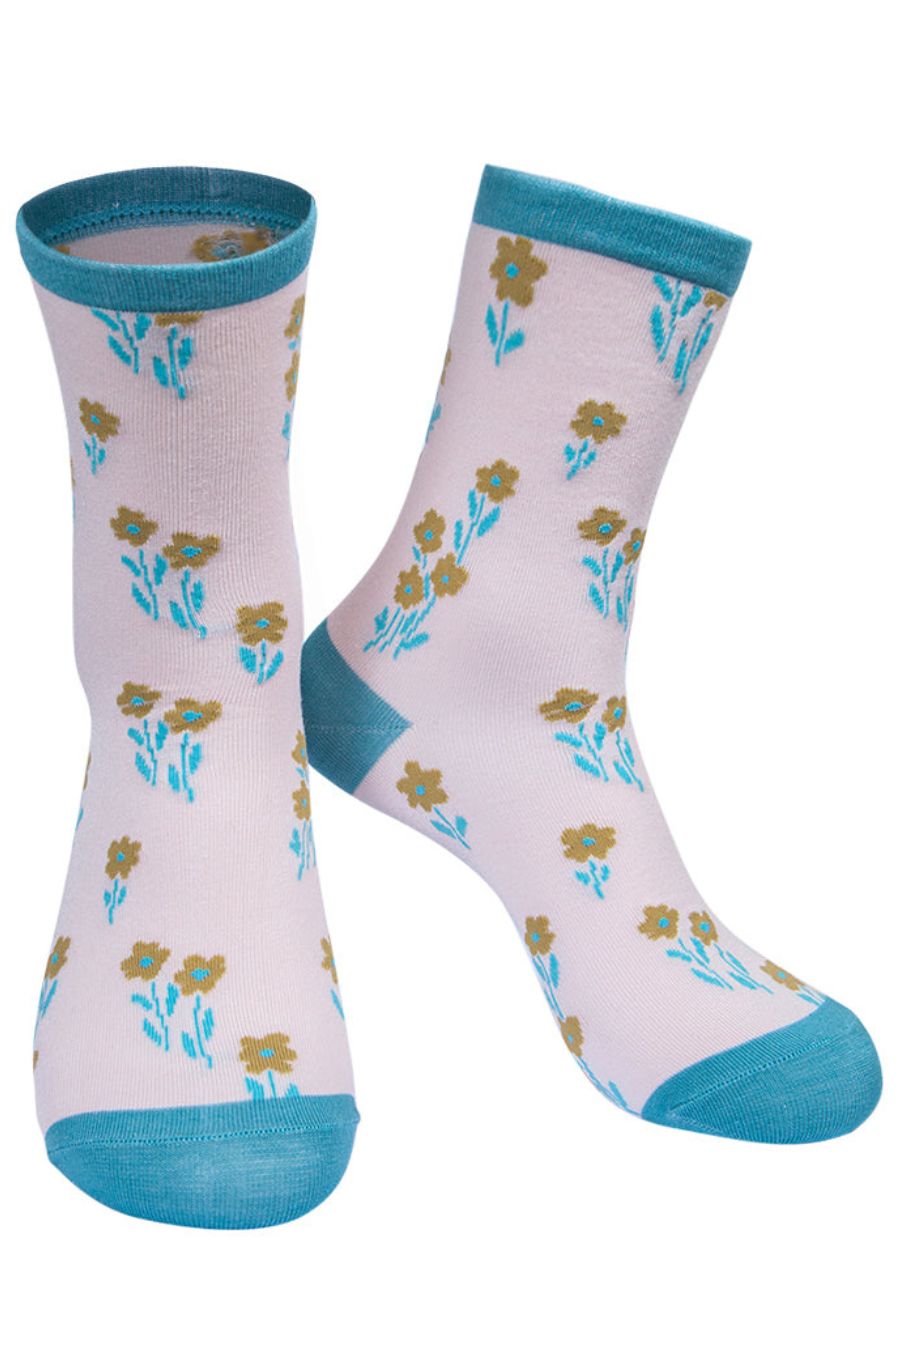 light pink and teal ankle socks with an all over ditsy floral pattern